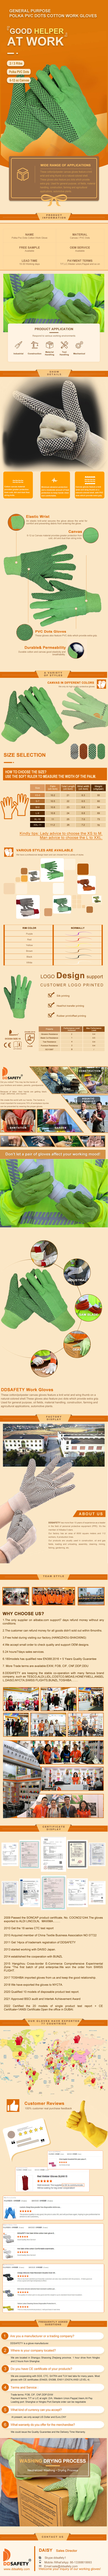 PVC Dotted Cotton Canvas Safety Work Gloves - DCD304 PVC Dotted Cotton Canvas Safety Work Gloves - DCD304 gloves,Dotted Canvas Gloves,work gloves,Canvas Work Gloves